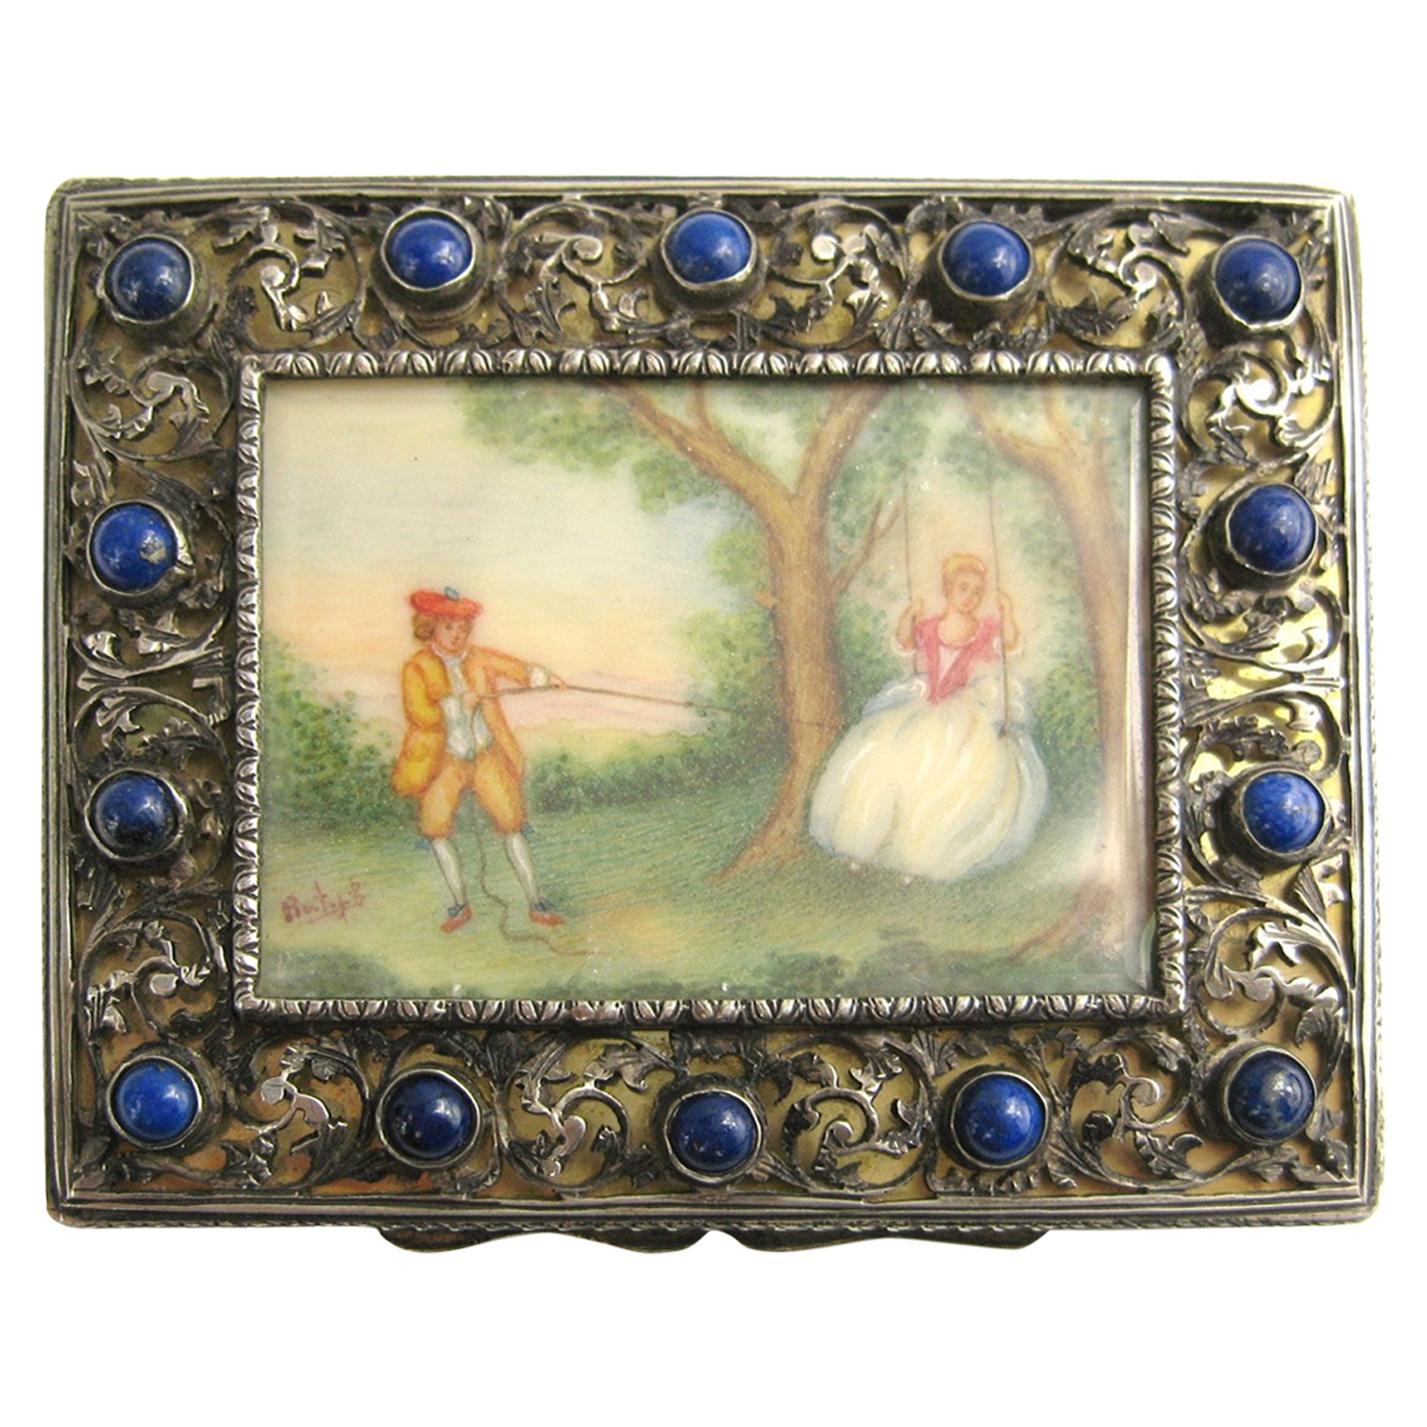  silver compact with Lapis Lazuli, Hand painted miniature scene For Sale